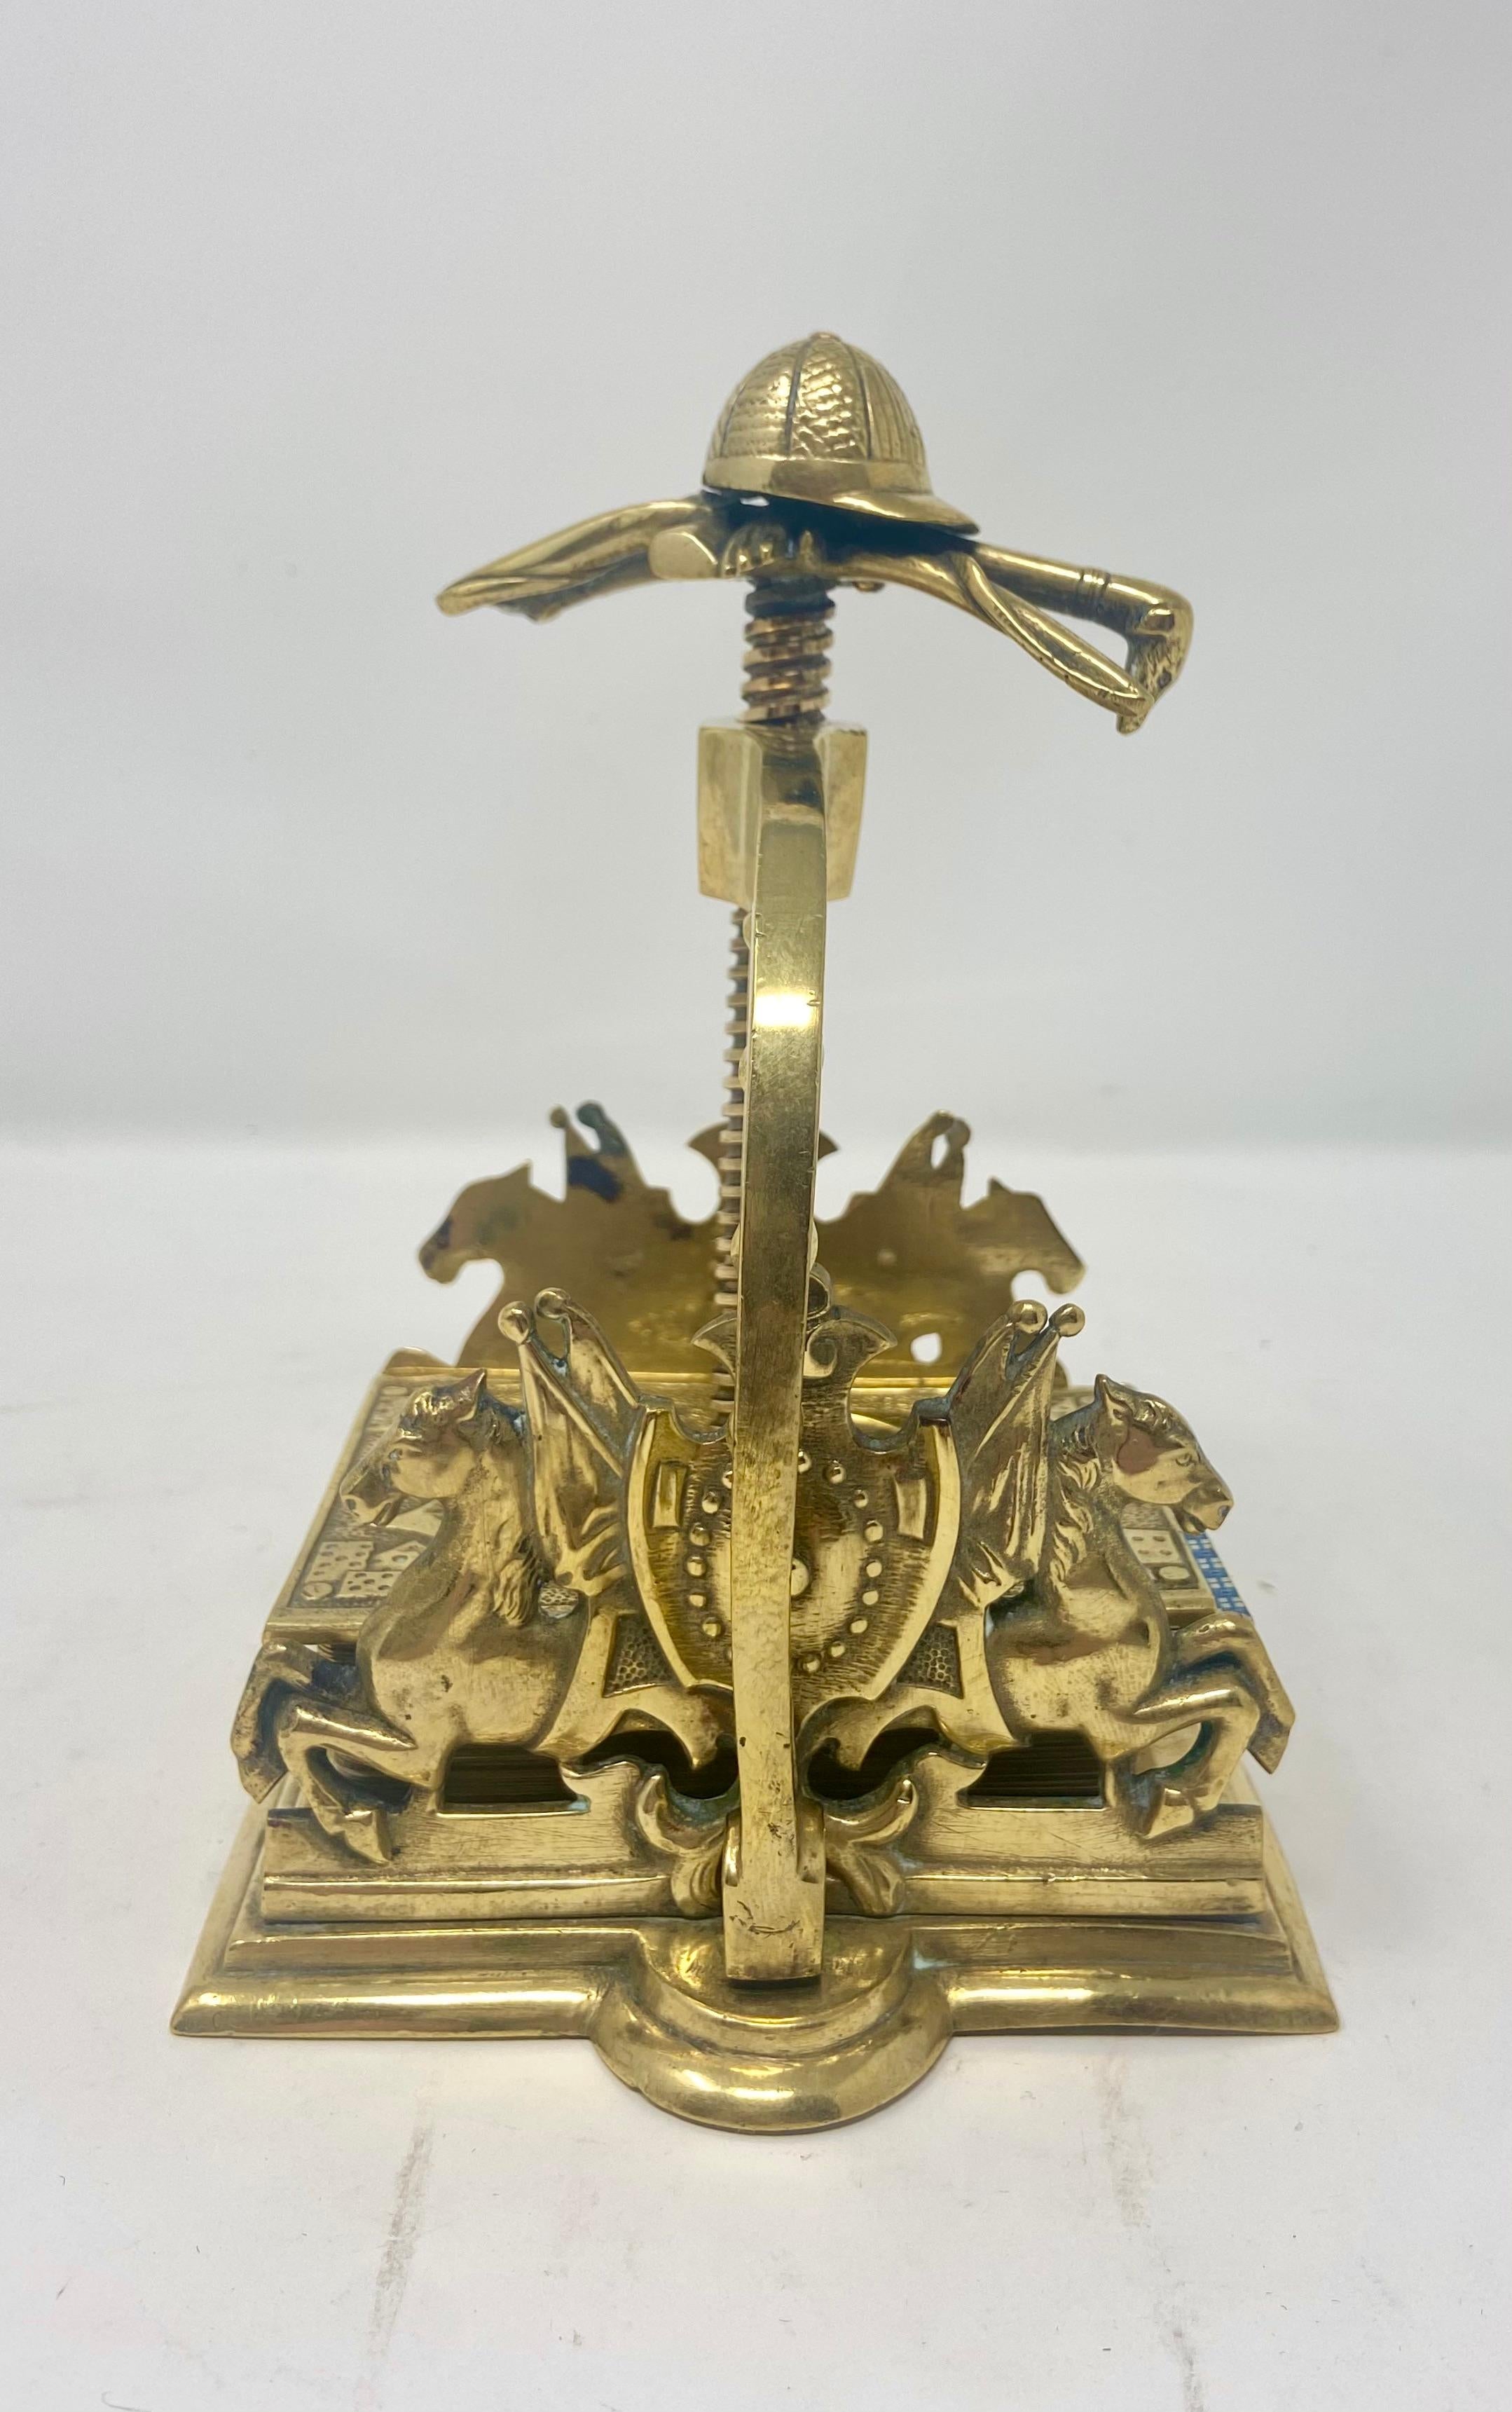 20th Century Antique Victorian Brass Playing Card Press in a Horse Racing Theme, Circa 1900.